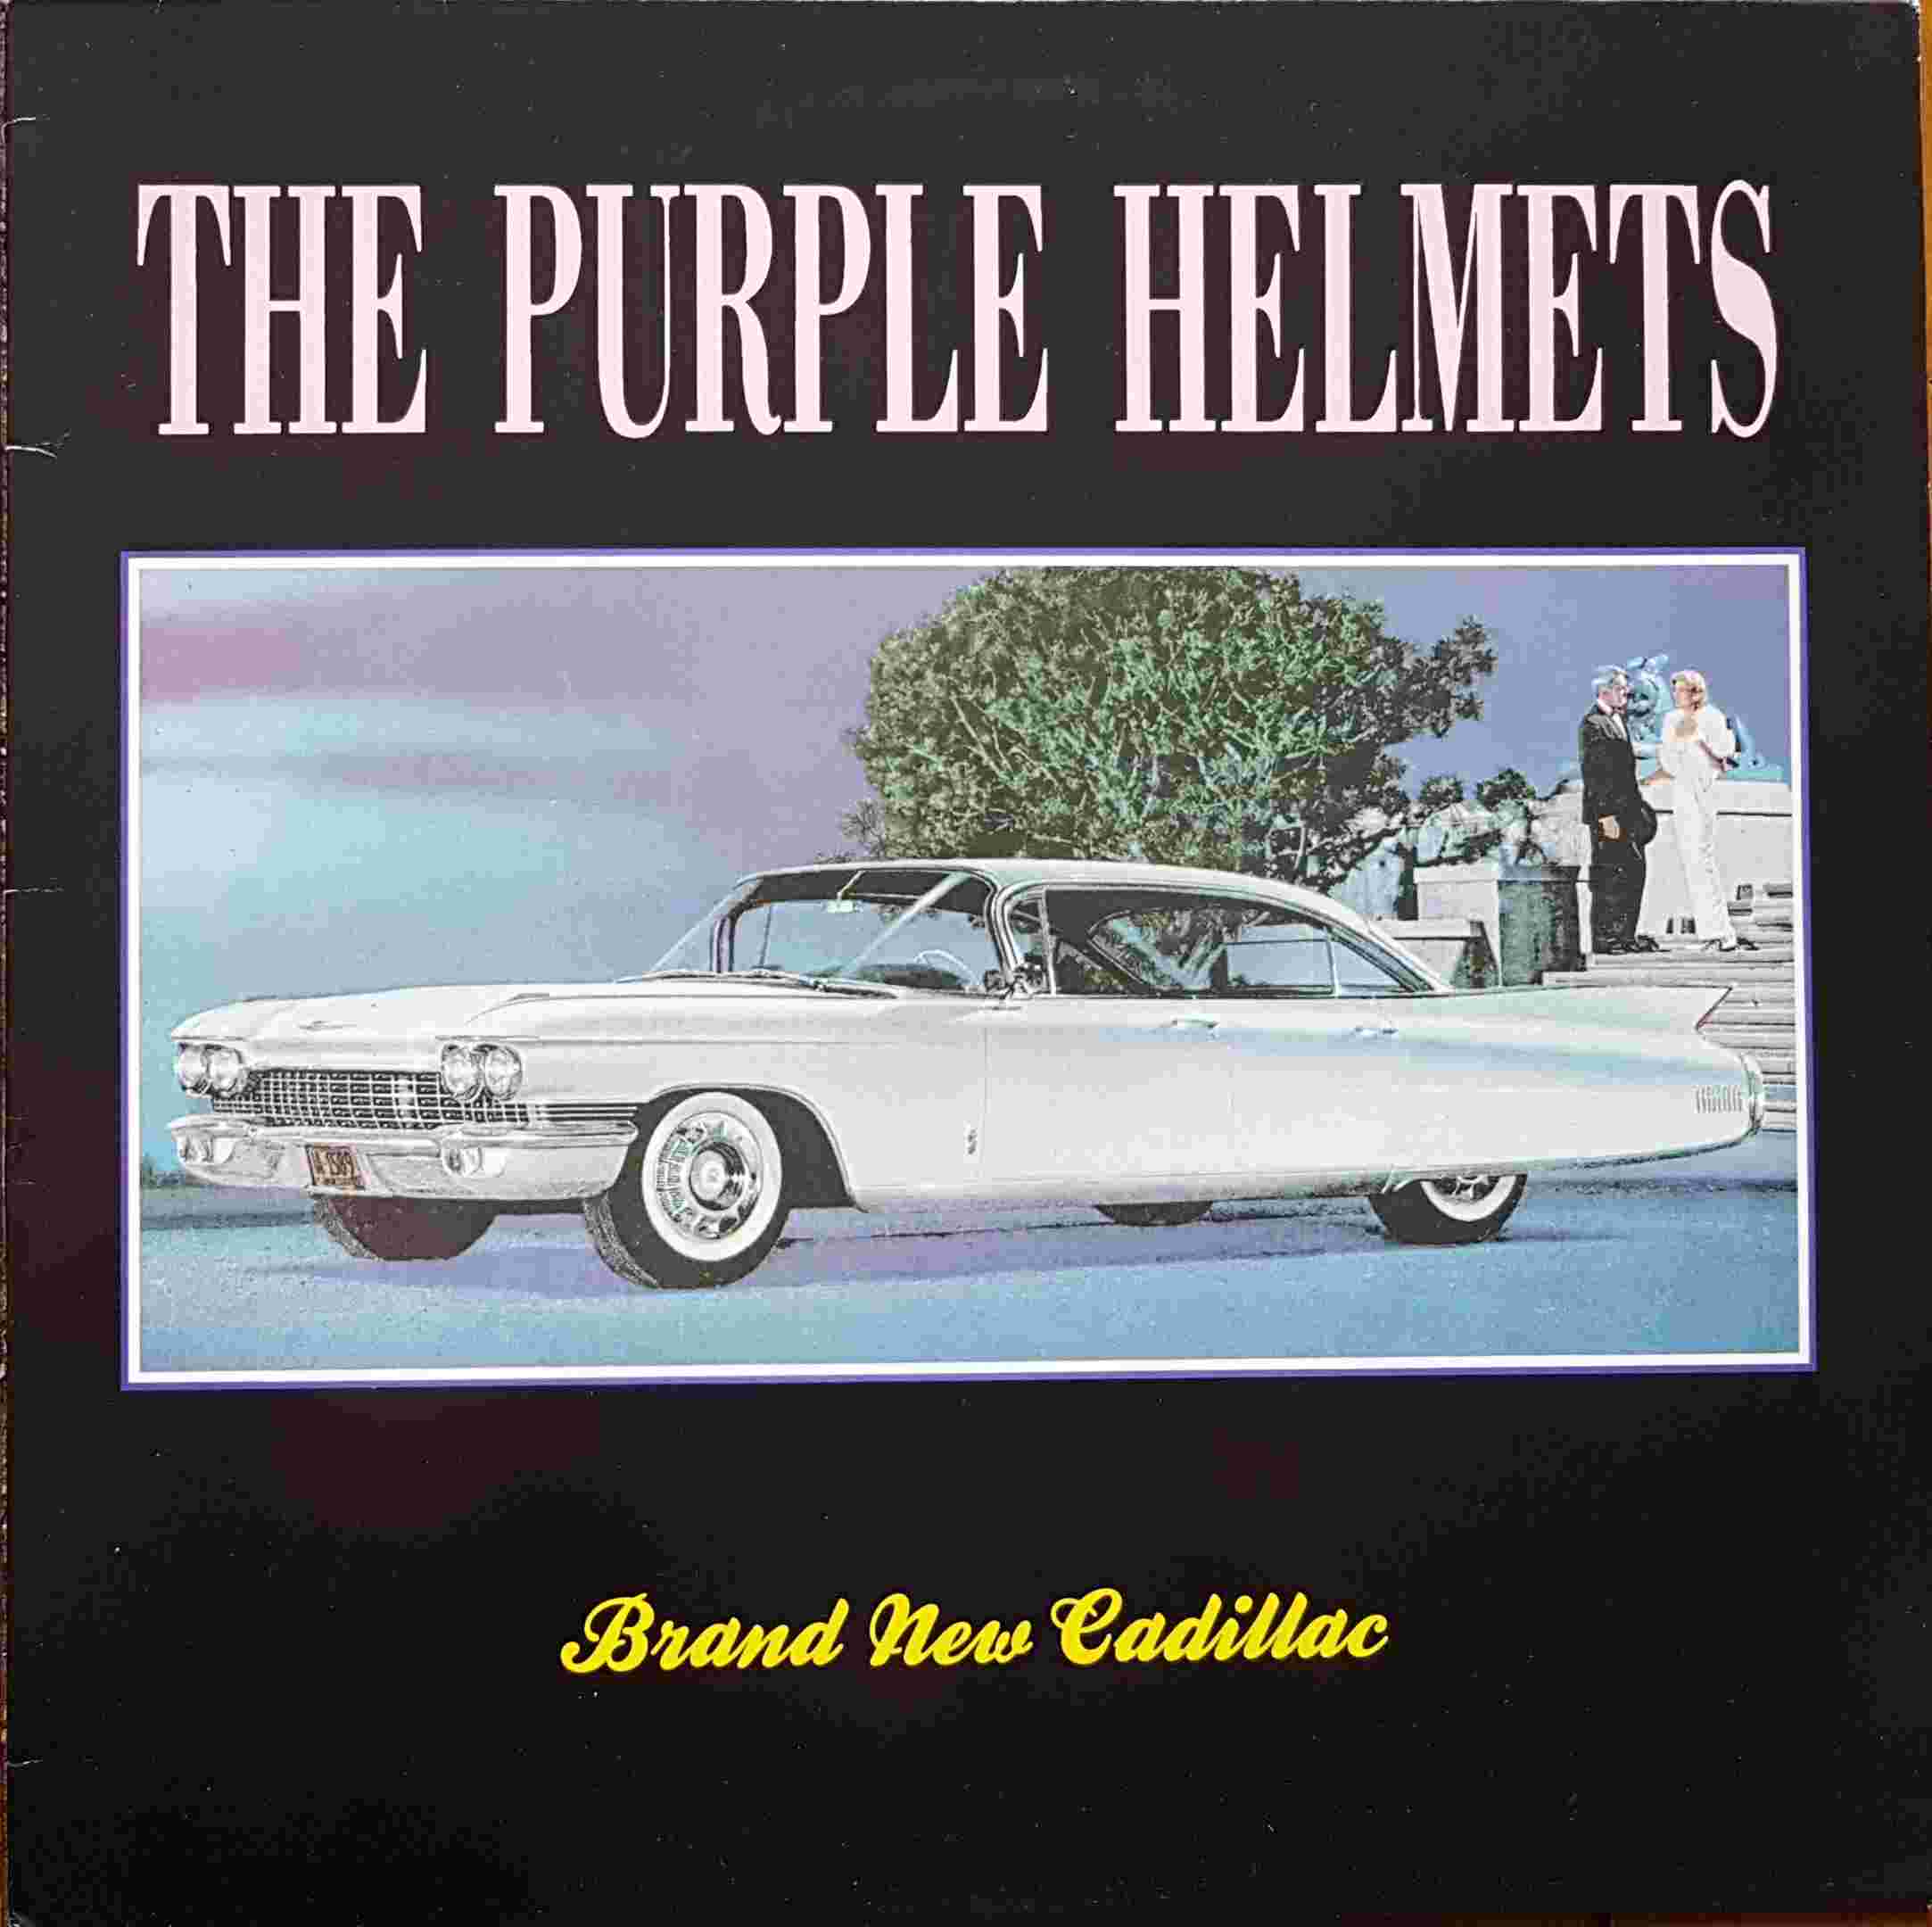 Picture of 12 ANA 50 Brand new Cadillac by artist The Purple Helmets from The Stranglers